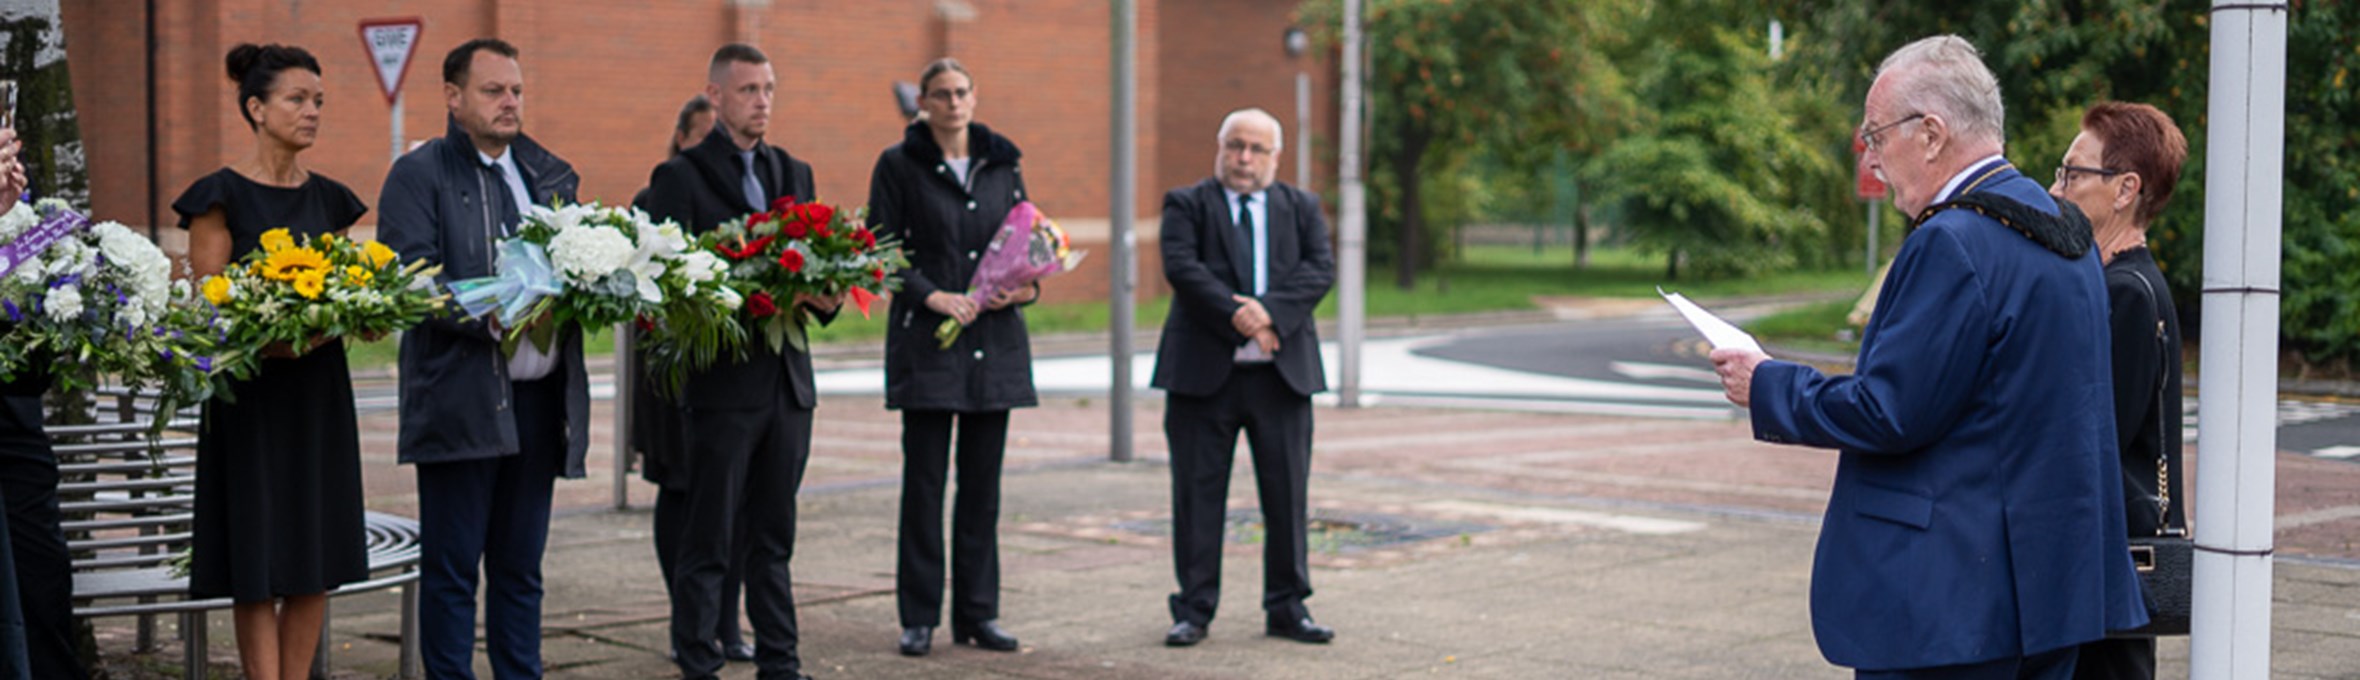 Wreath laying ceremony at Ashfield District Council Offices